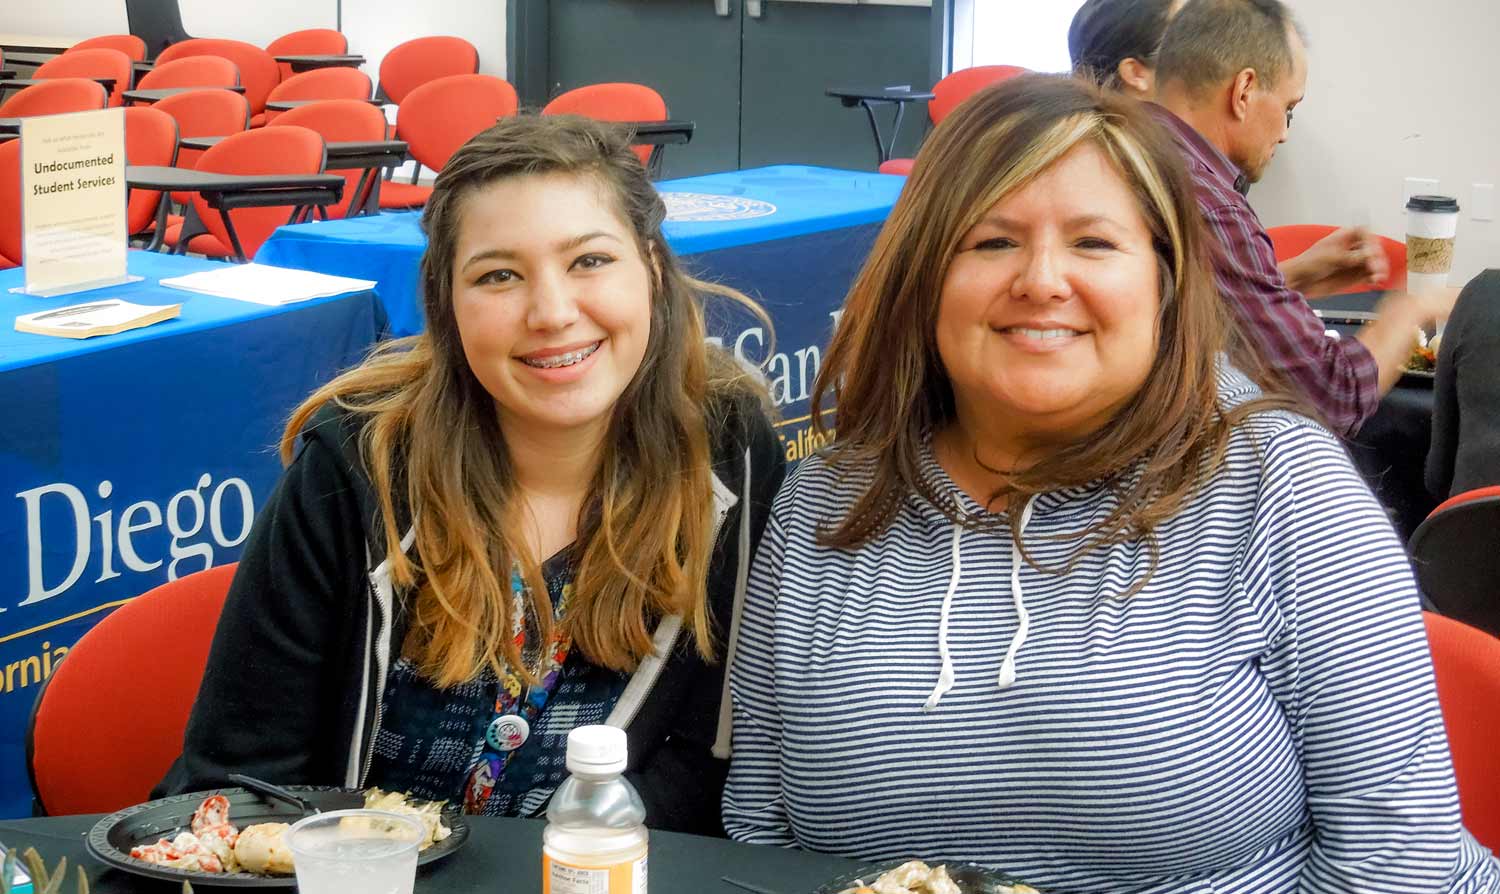 Photo: From left, Southwestern College student Hali Urista and Kimi Rodriguez-McSwain, adjunct counselor at Southwestern College.